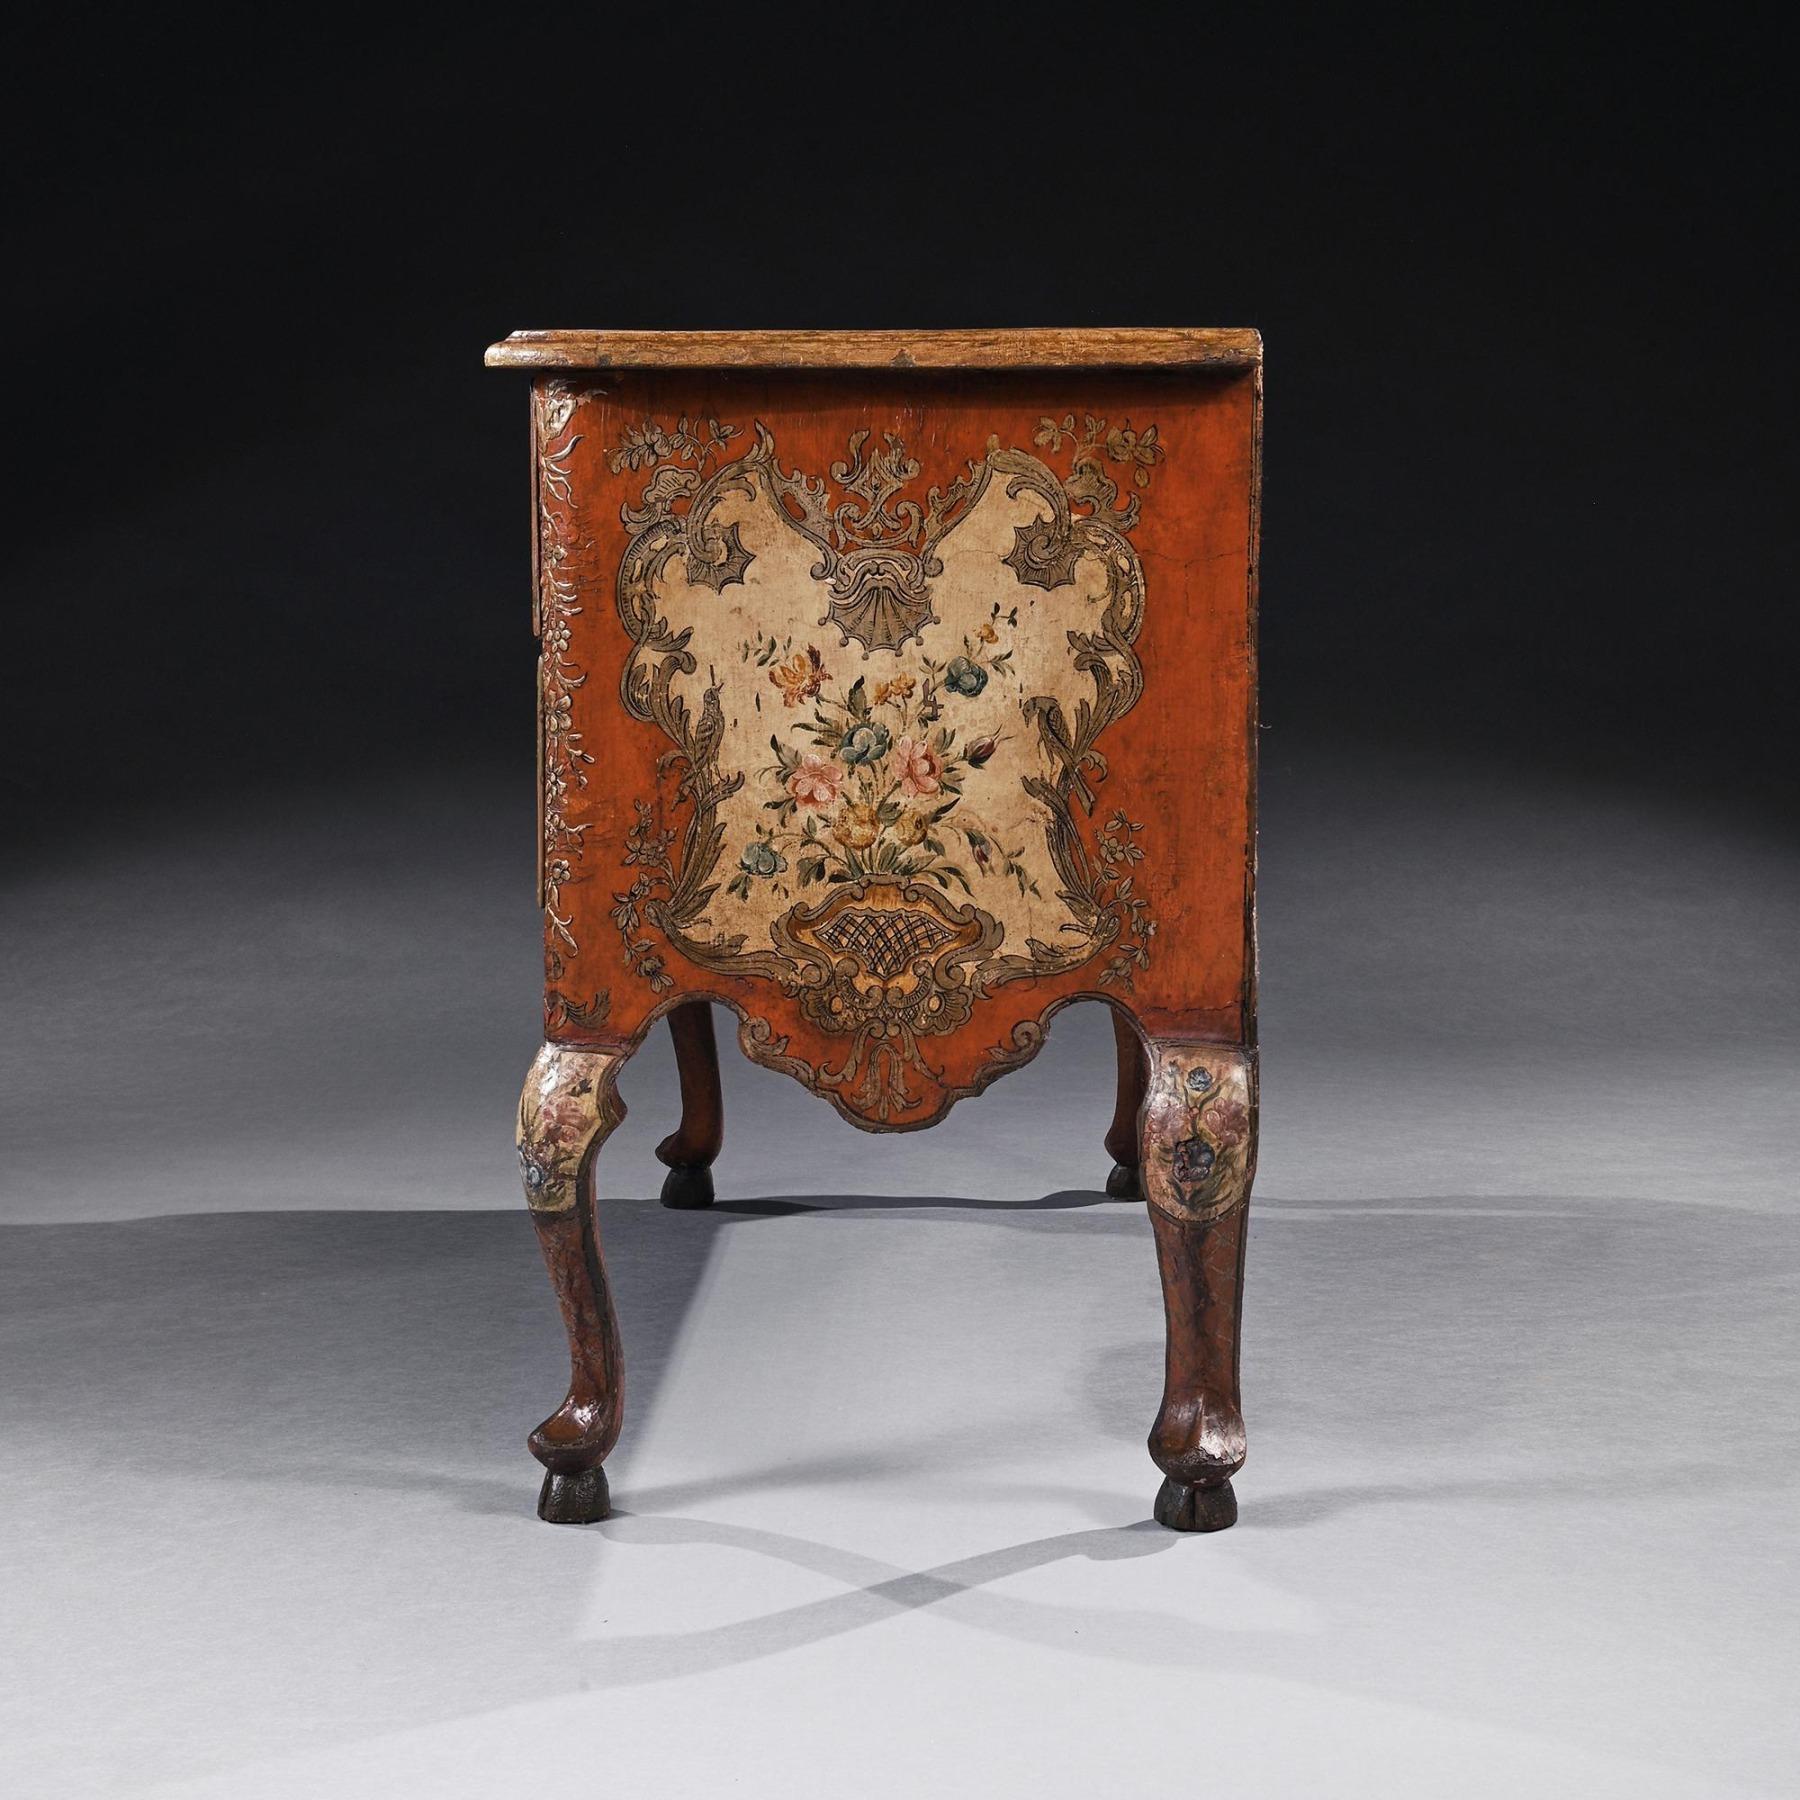 18th Century Sicilian Polychrome Painted Parcel Gilt Commode In Good Condition For Sale In Benington, Herts